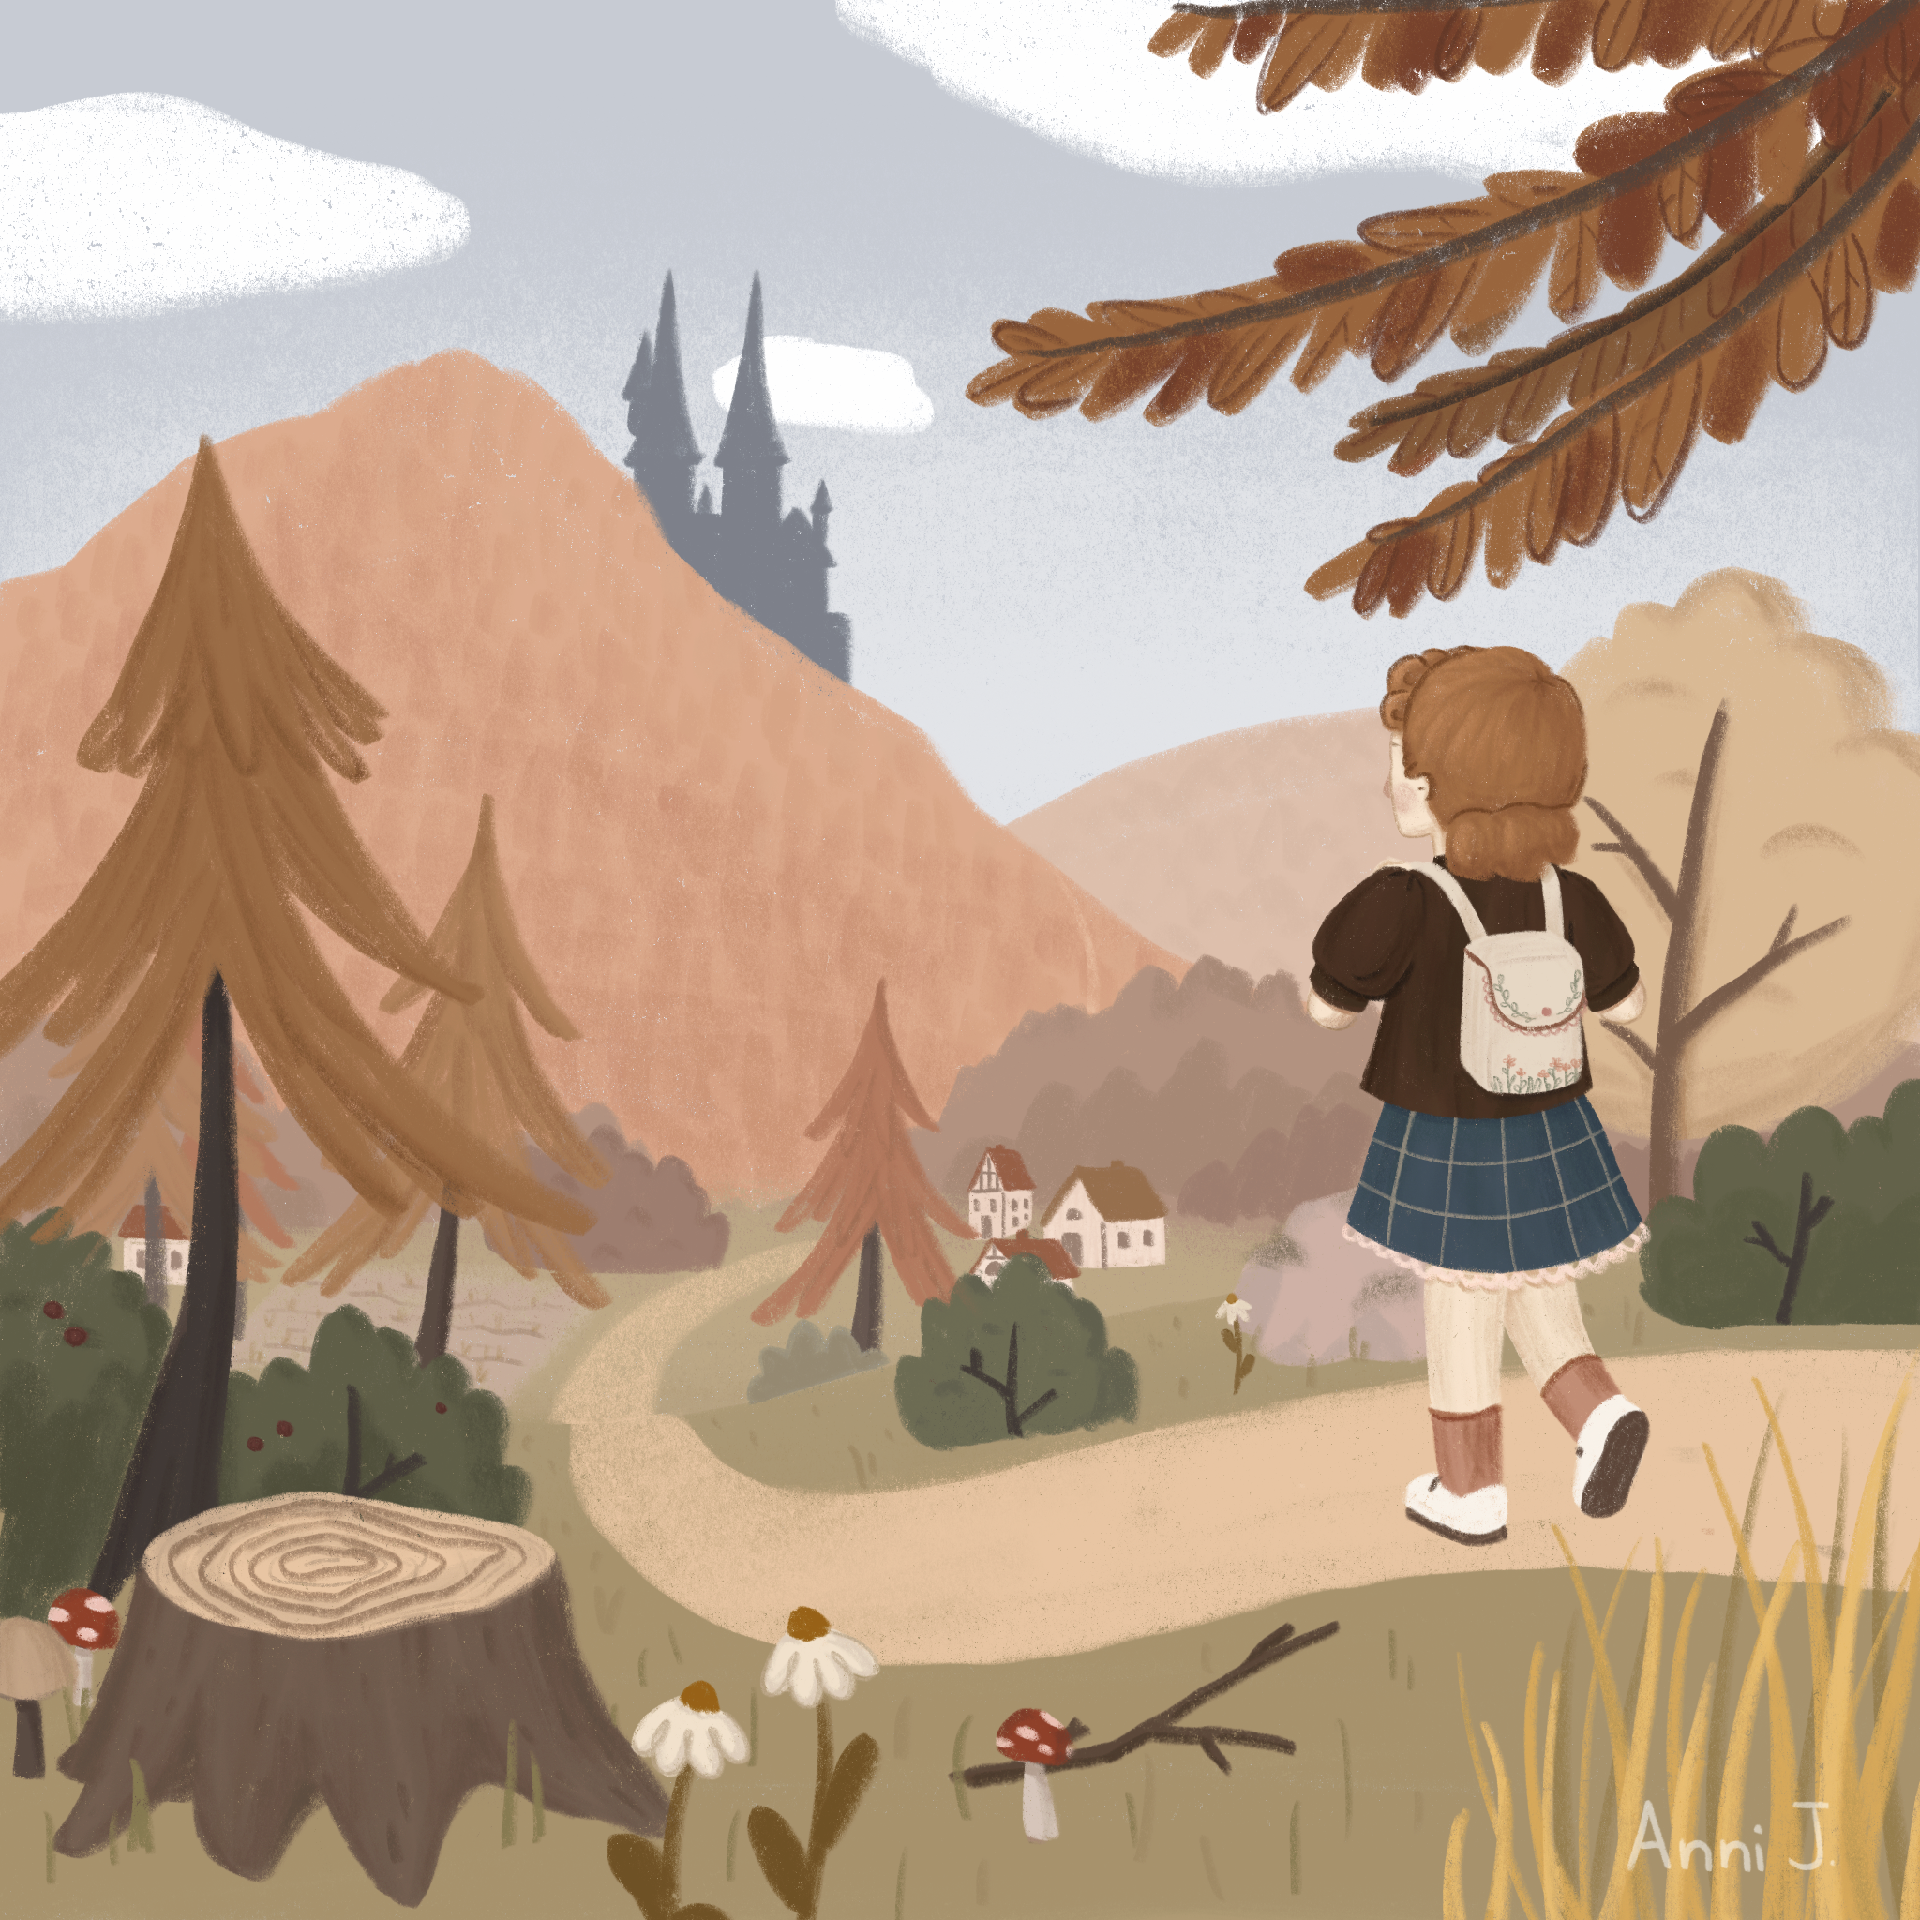 A cute children's book illustration in which you see the back of a girl wearing a brown top and a checkered blue skirt looking out over an autumnal landscape. in the front you see bushes and different trees in autumn colors. In a valley you see a field as well as several small old farm houses. In the background you can see a mountain with a shilouette of a big castle on top.